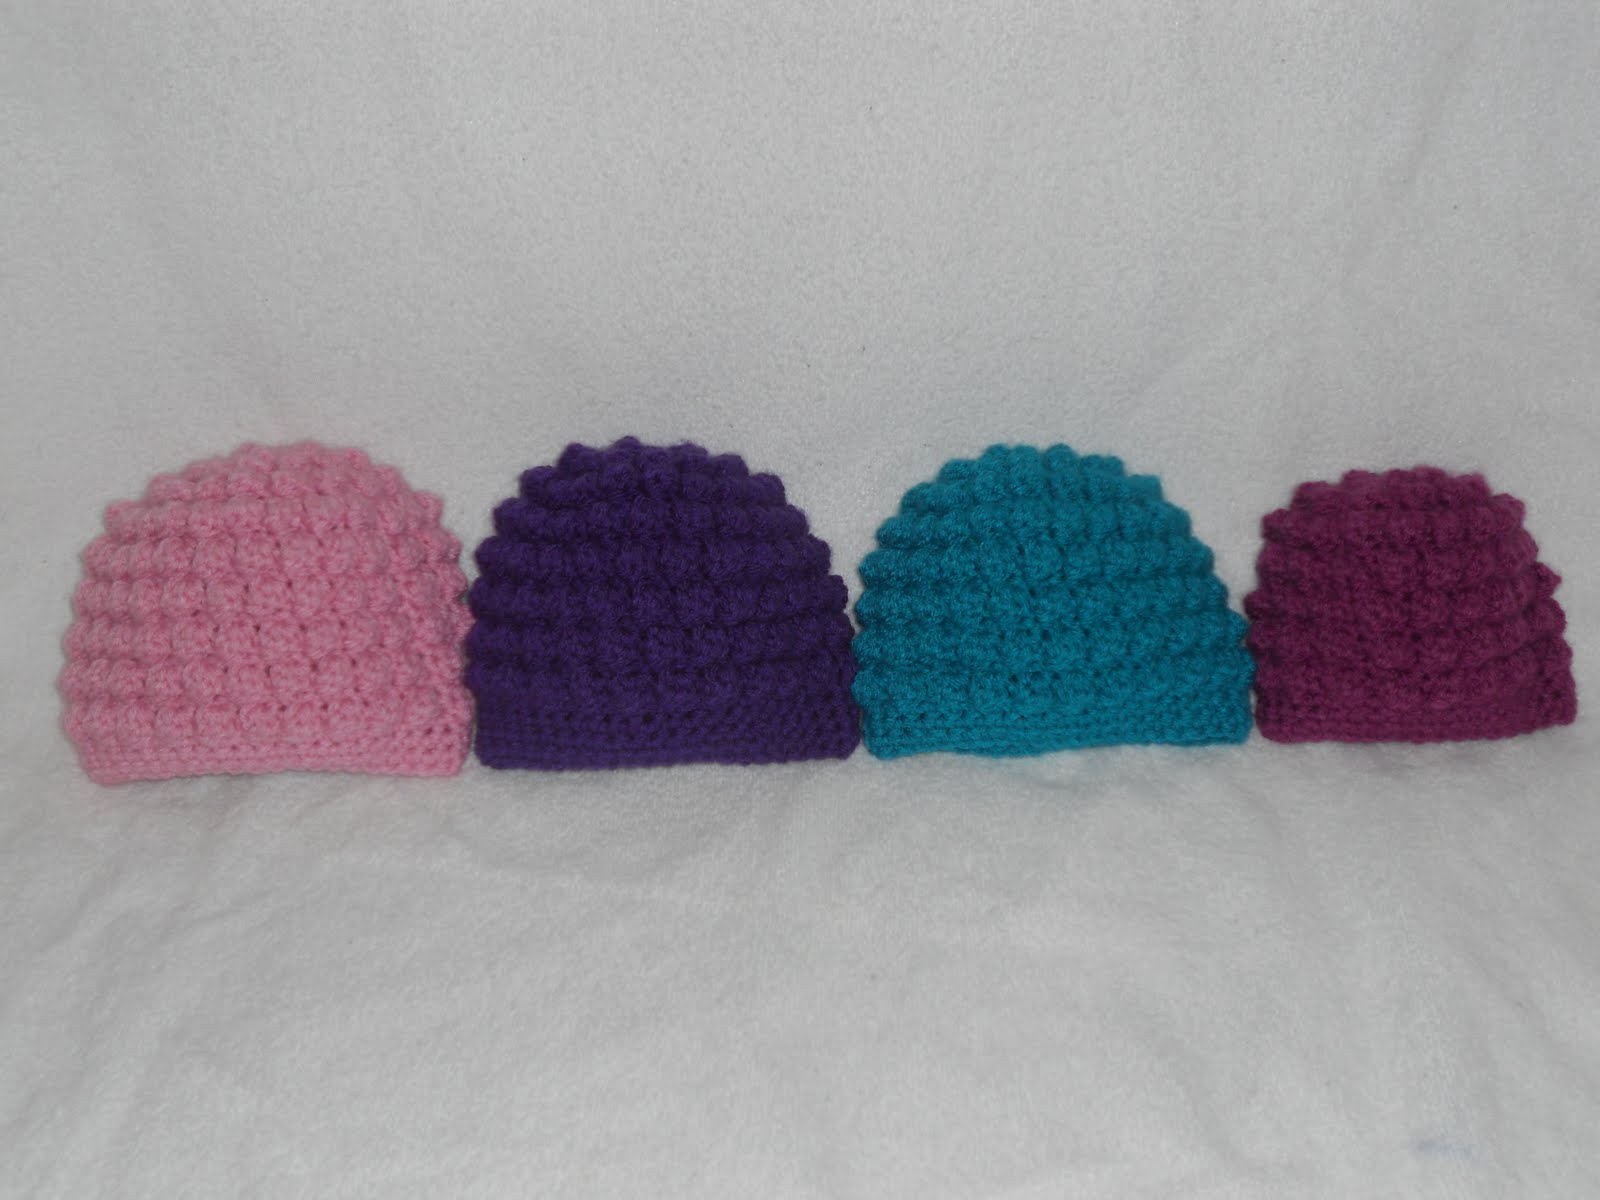 A crochet beanie hat pattern for the winter!